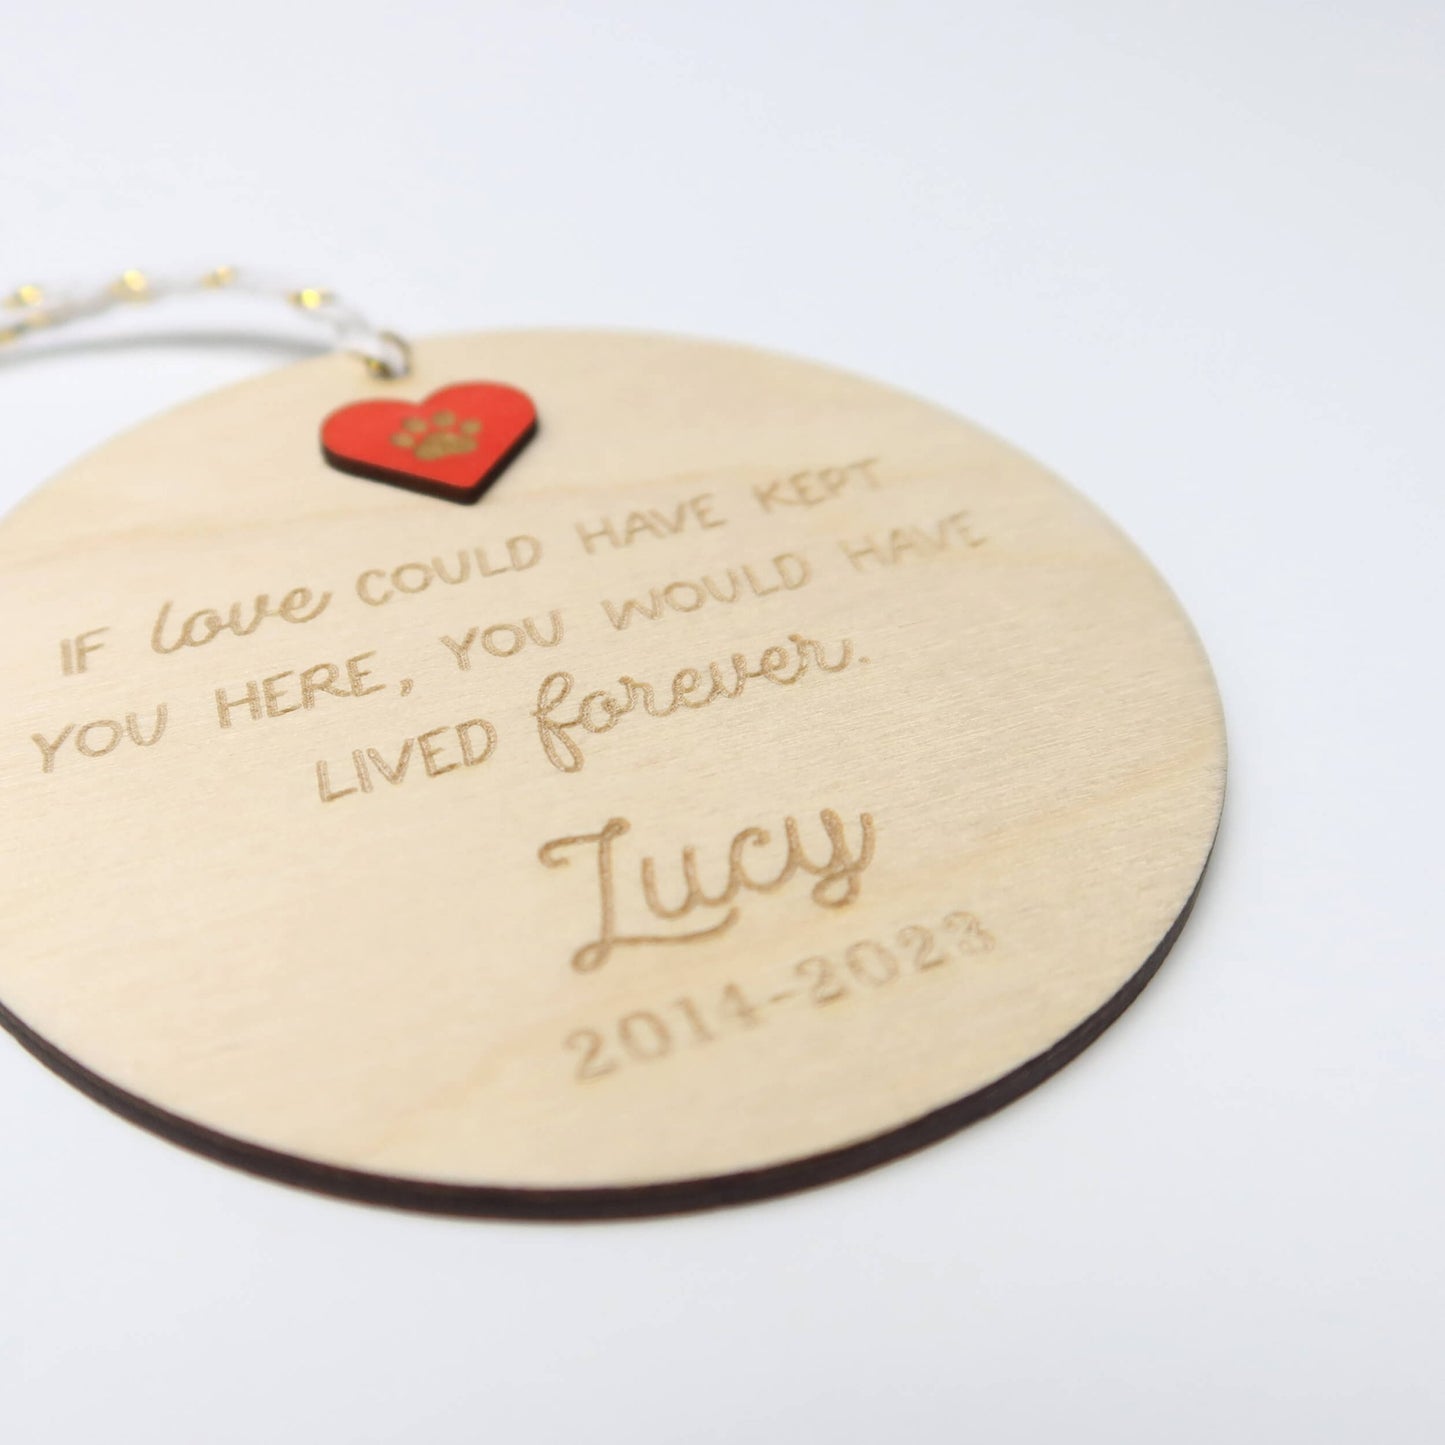 Love Could Have Kept You Here Pet Memorial Ornament - Holiday Ornaments - Moon Rock Prints